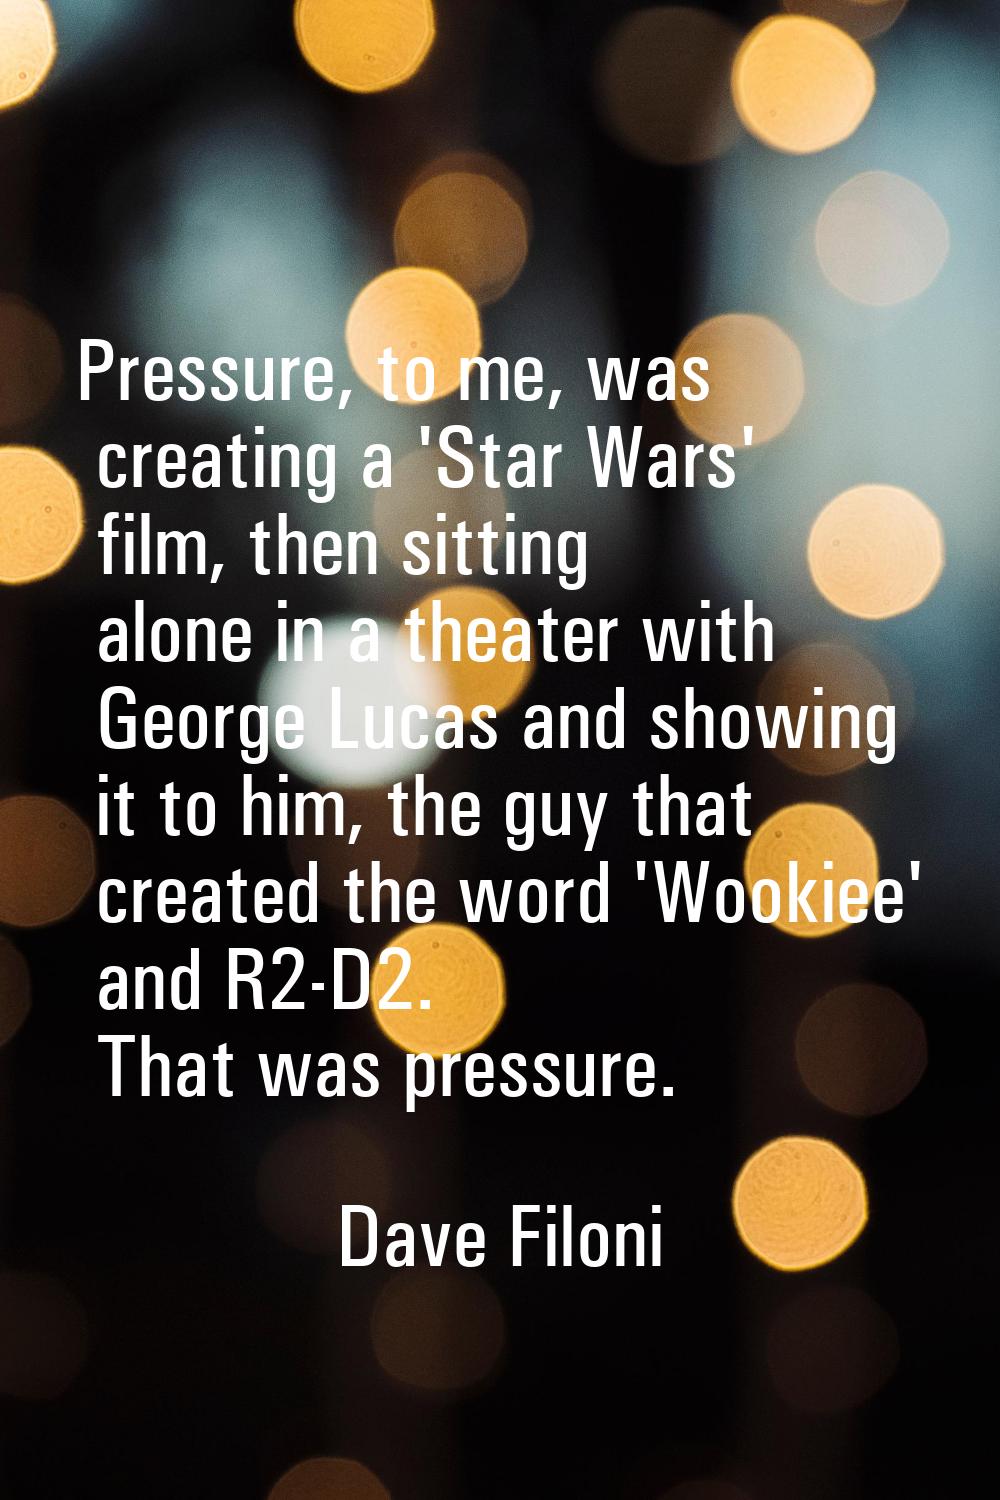 Pressure, to me, was creating a 'Star Wars' film, then sitting alone in a theater with George Lucas